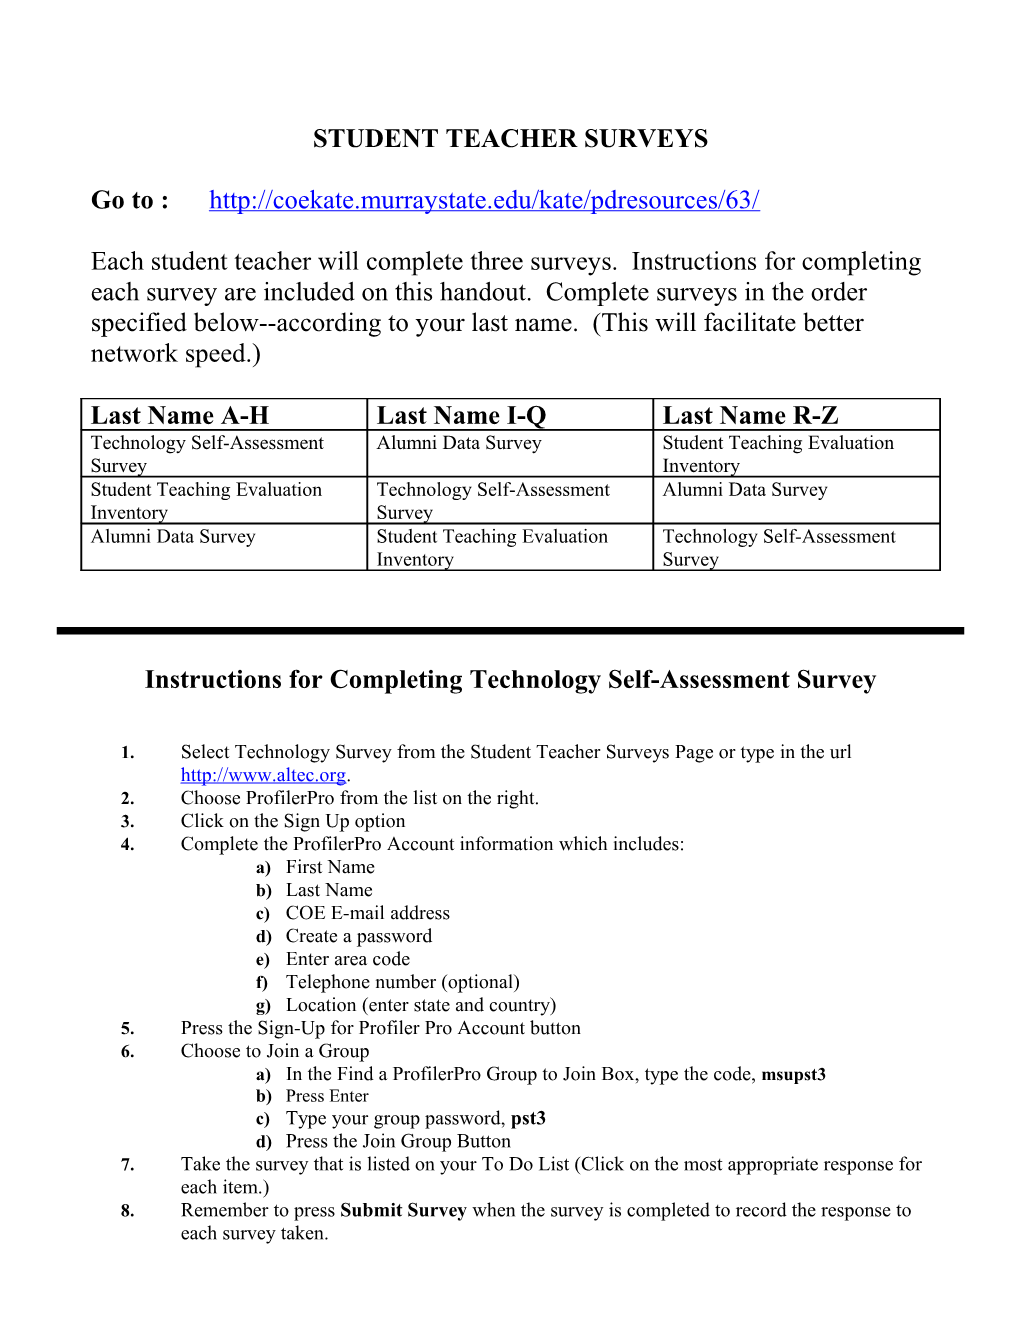 Instructions for Completing Technology Self-Assessment Online